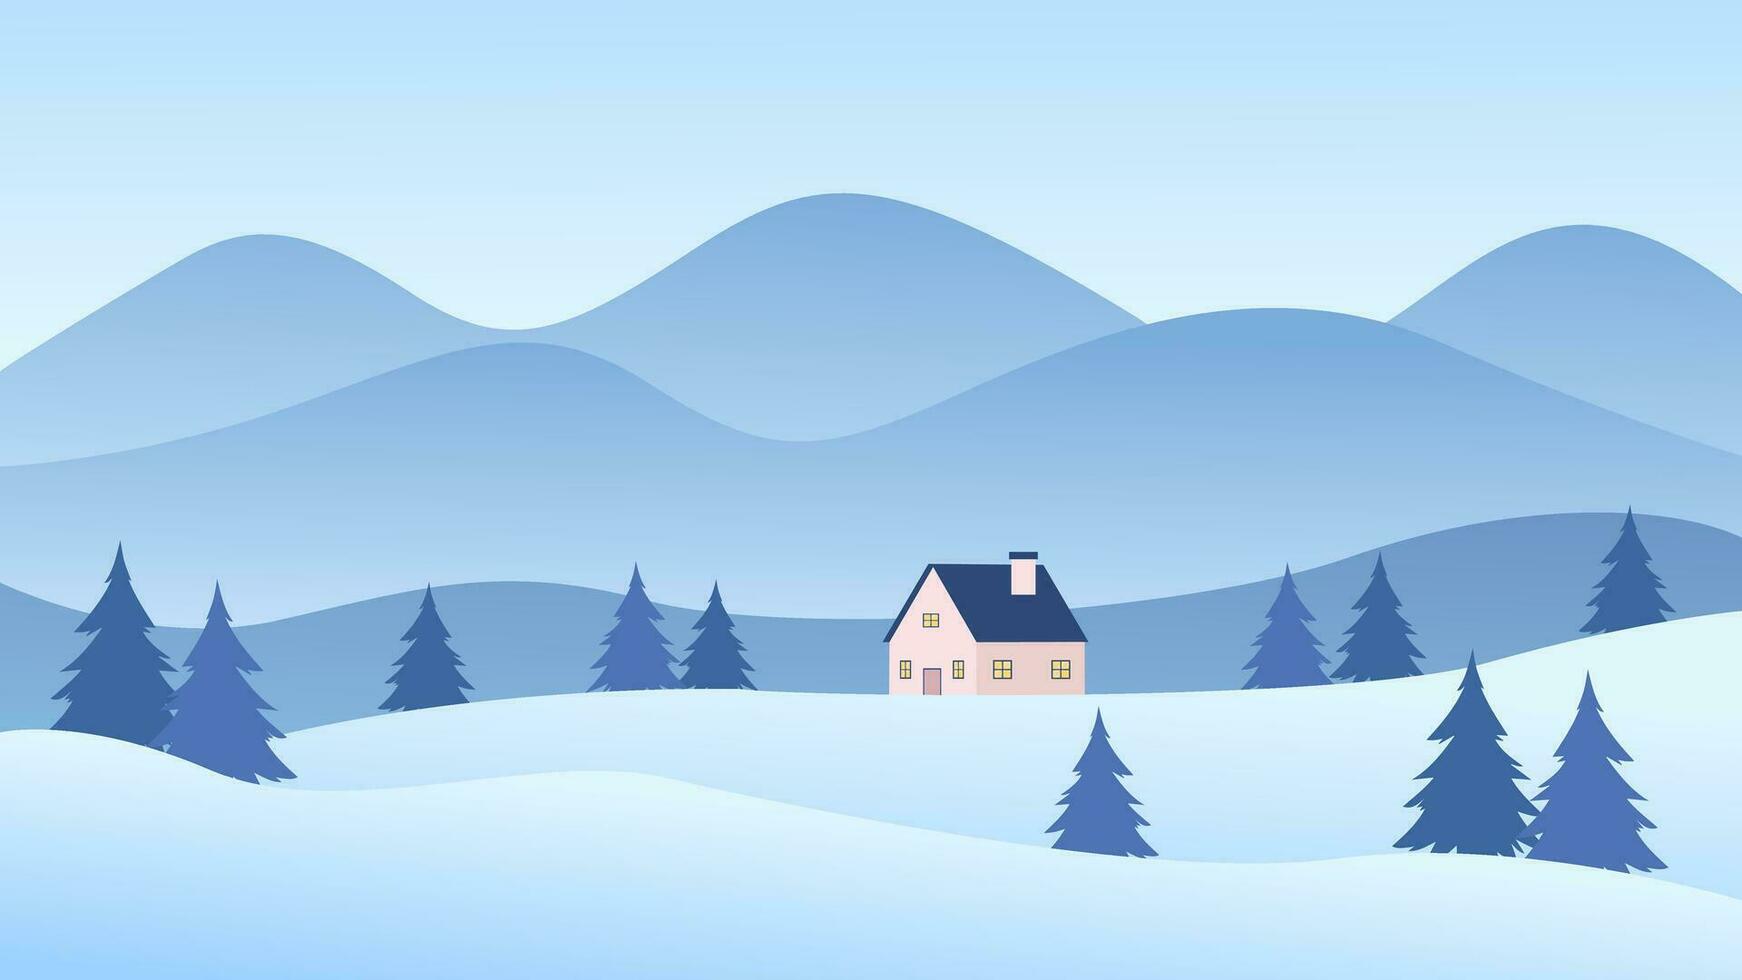 Simple winter landscape vector illustration, wallpaper background with the winter snow theme, vector illustration of mountain, house, and pine trees